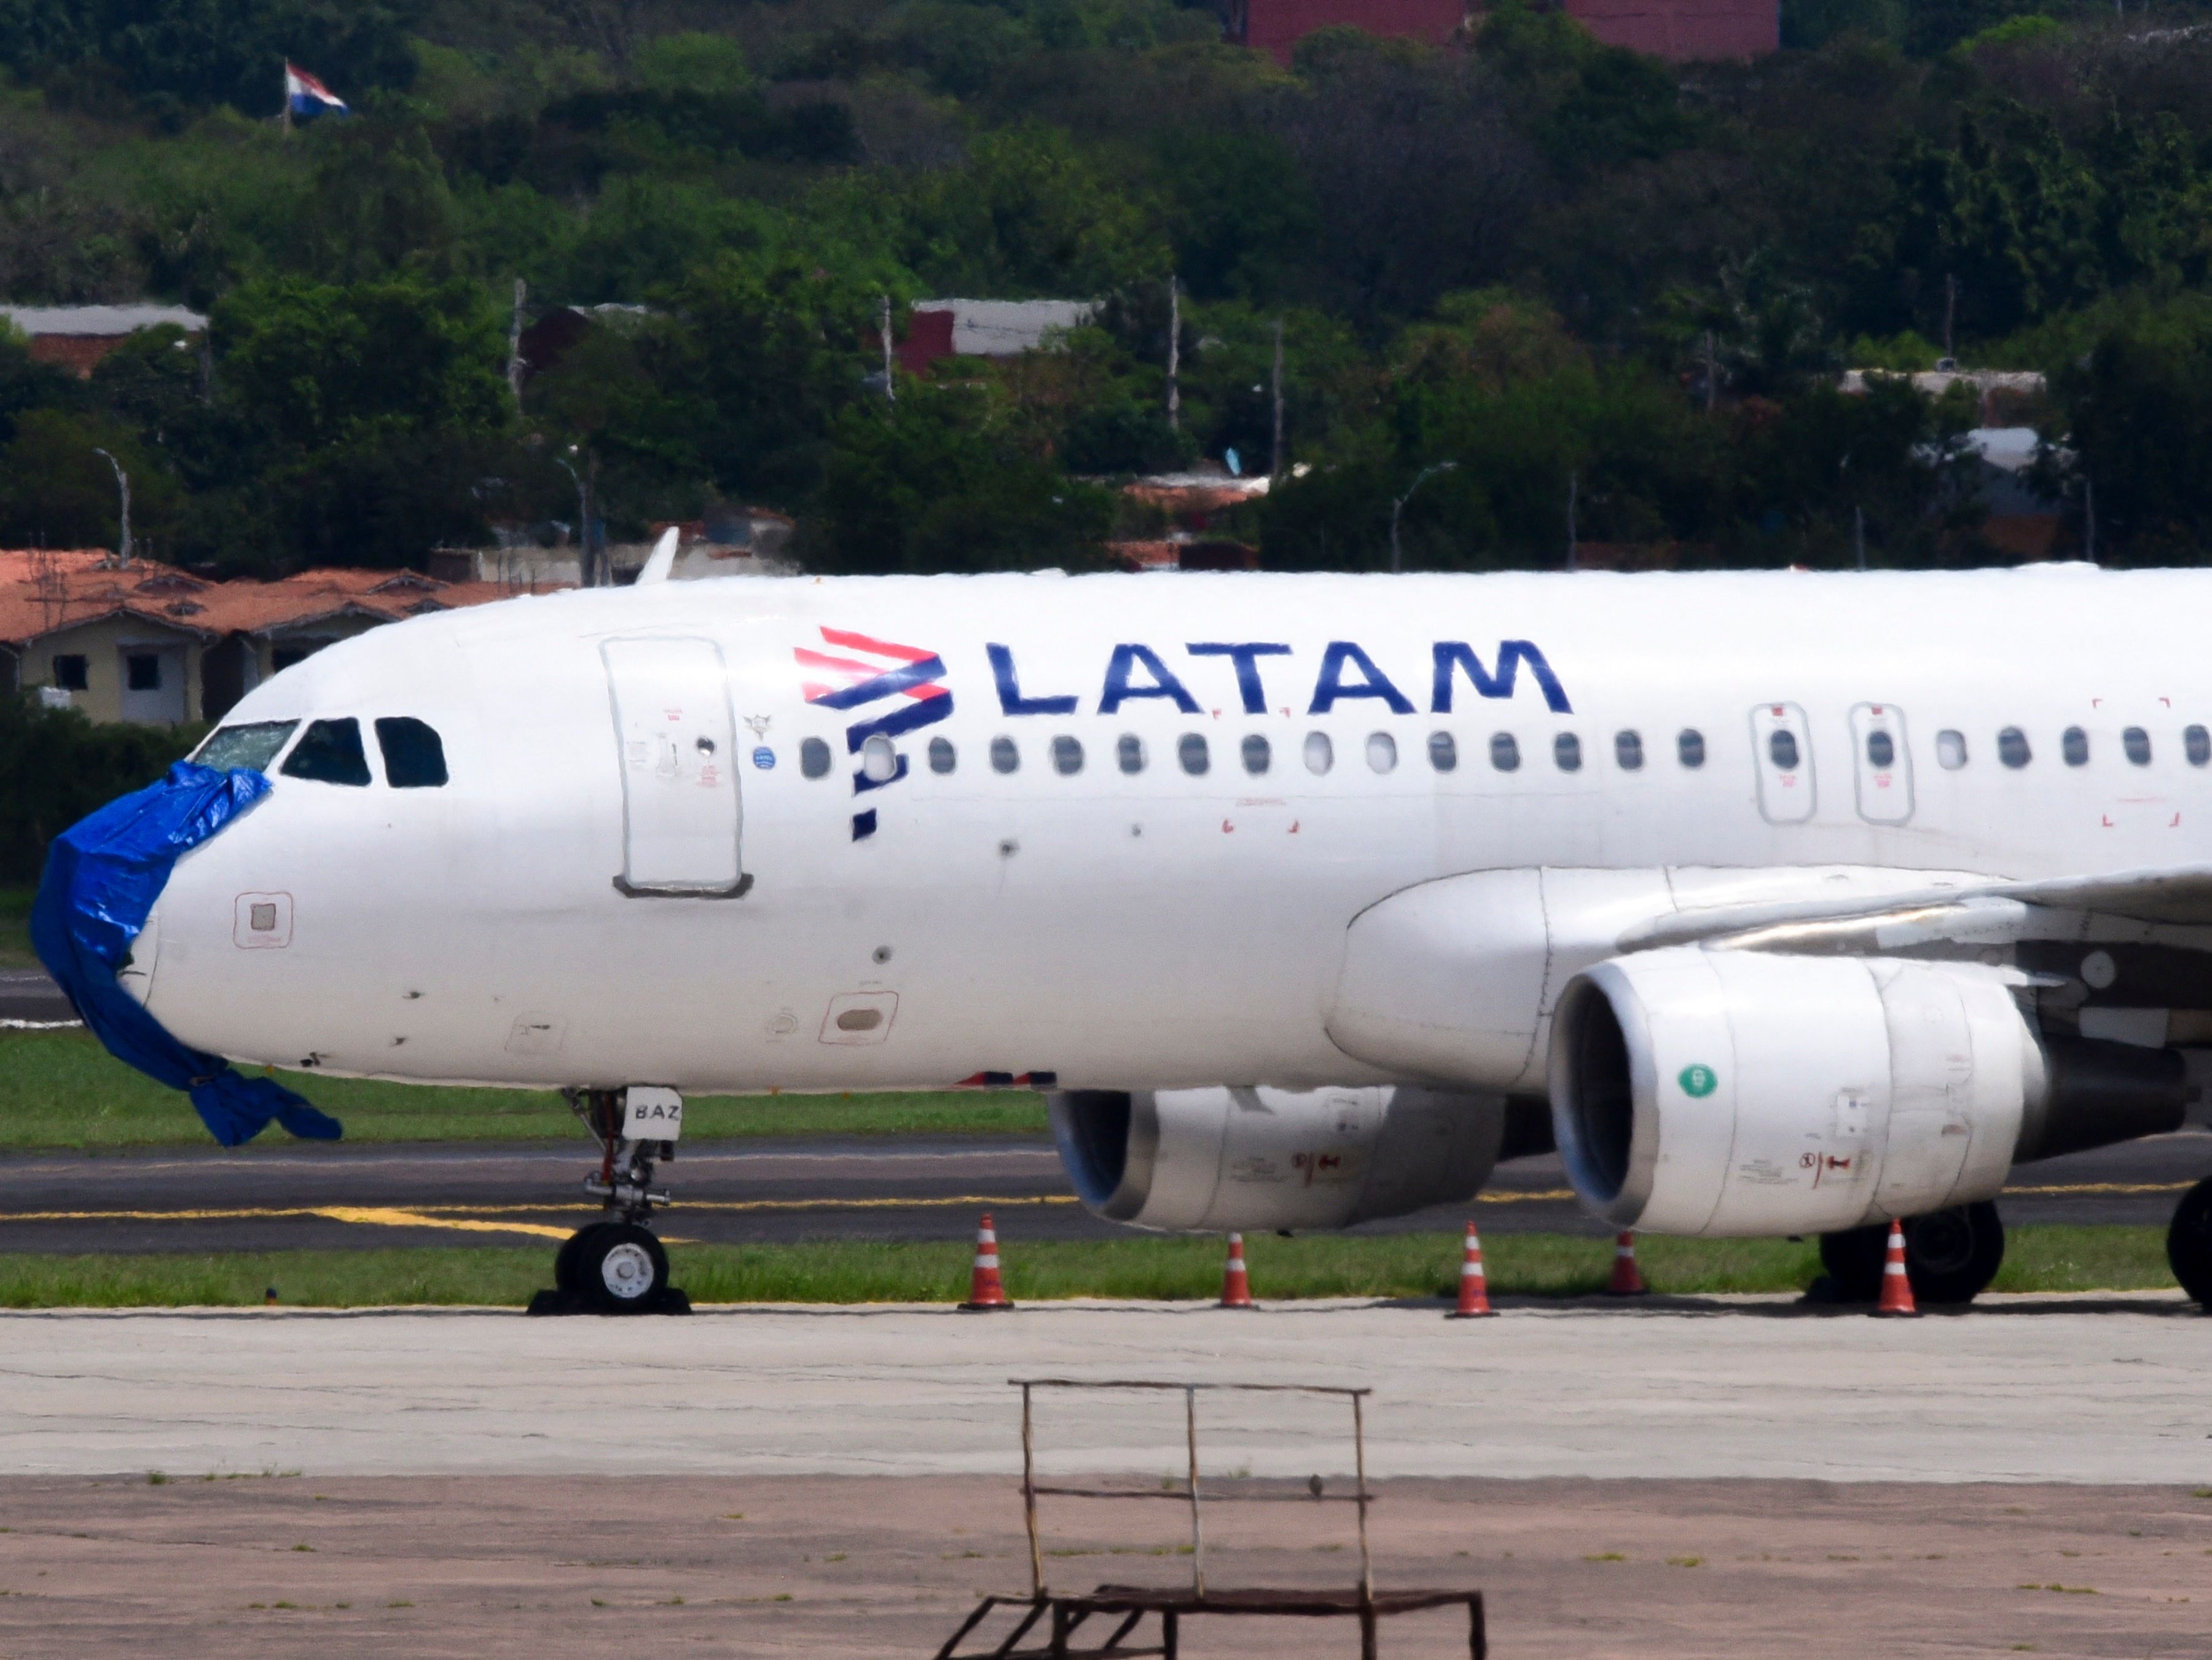 A Latam Airlines plane is pictured after an emergency landing on the eve at Silvio Pettirossi International Airport in Luque, Paraguay, on October 27, 2022. - A Chilean-Brazilian airline Latam plane with 48 passengers on board made an emergency landing in Luque at midnight on October 26 without an engine and with serious damage after flying through a severe storm, Paraguayan authorities said on October 27. 